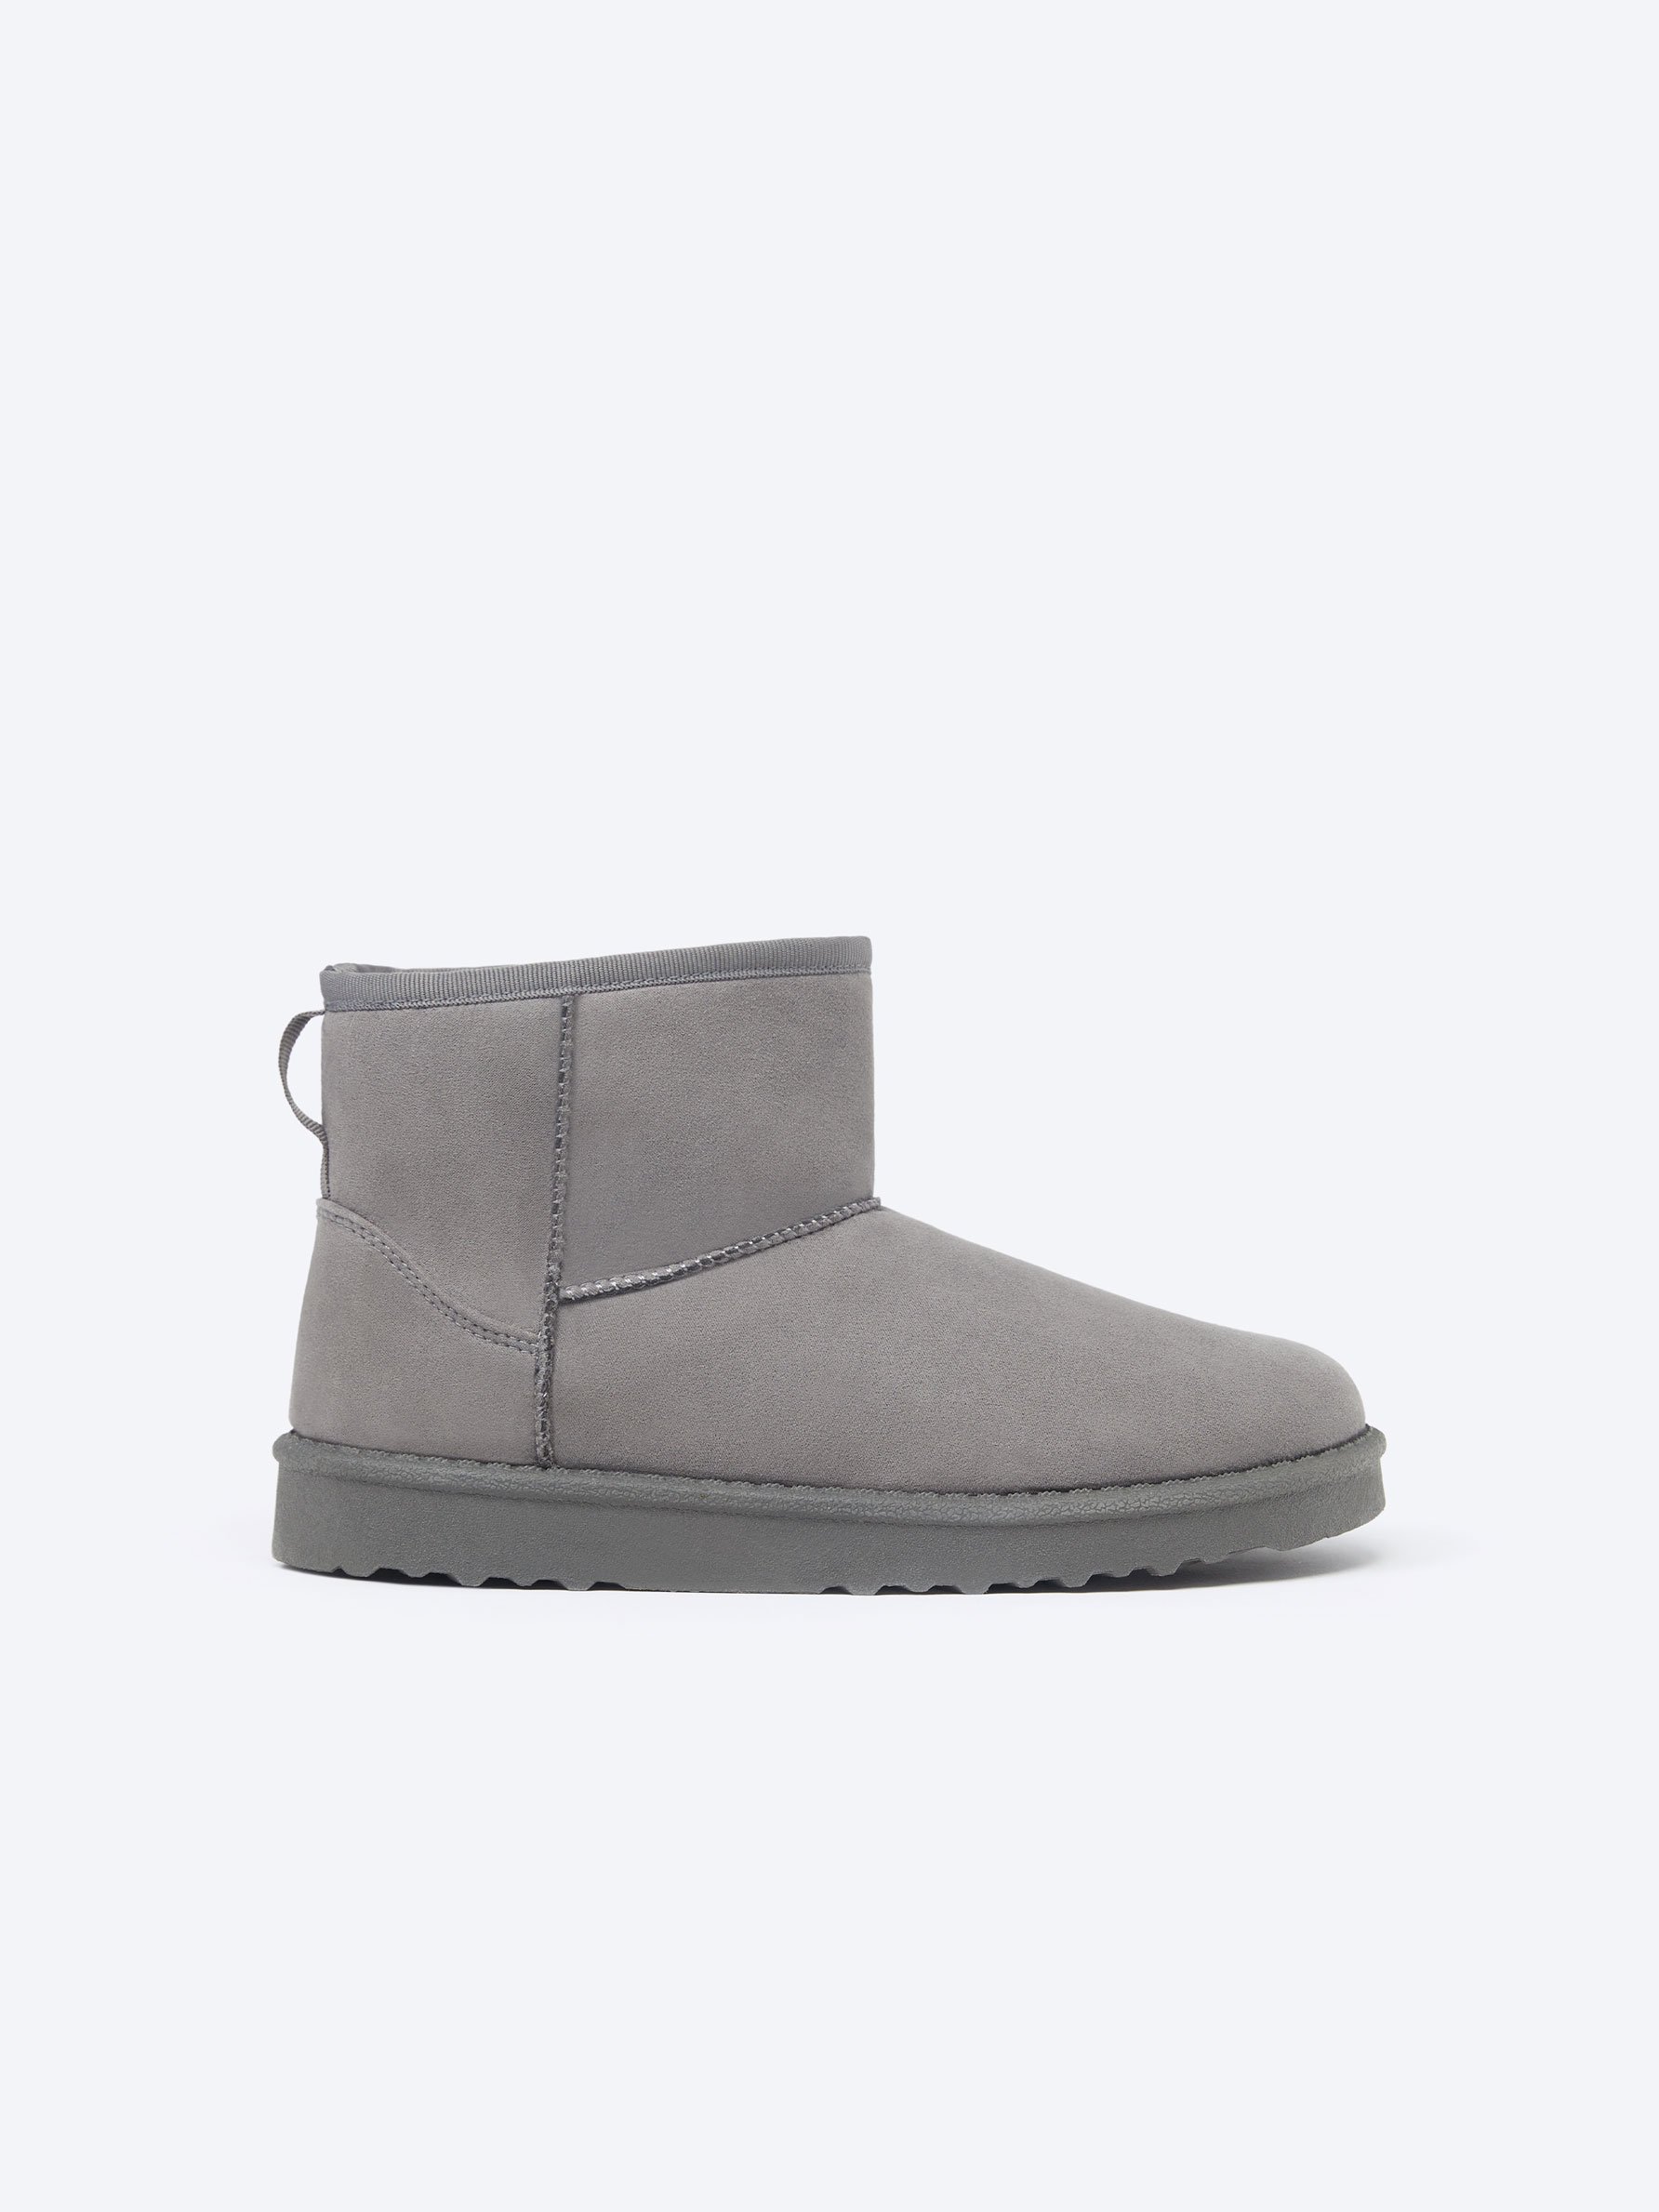 Gray lined ankle boot